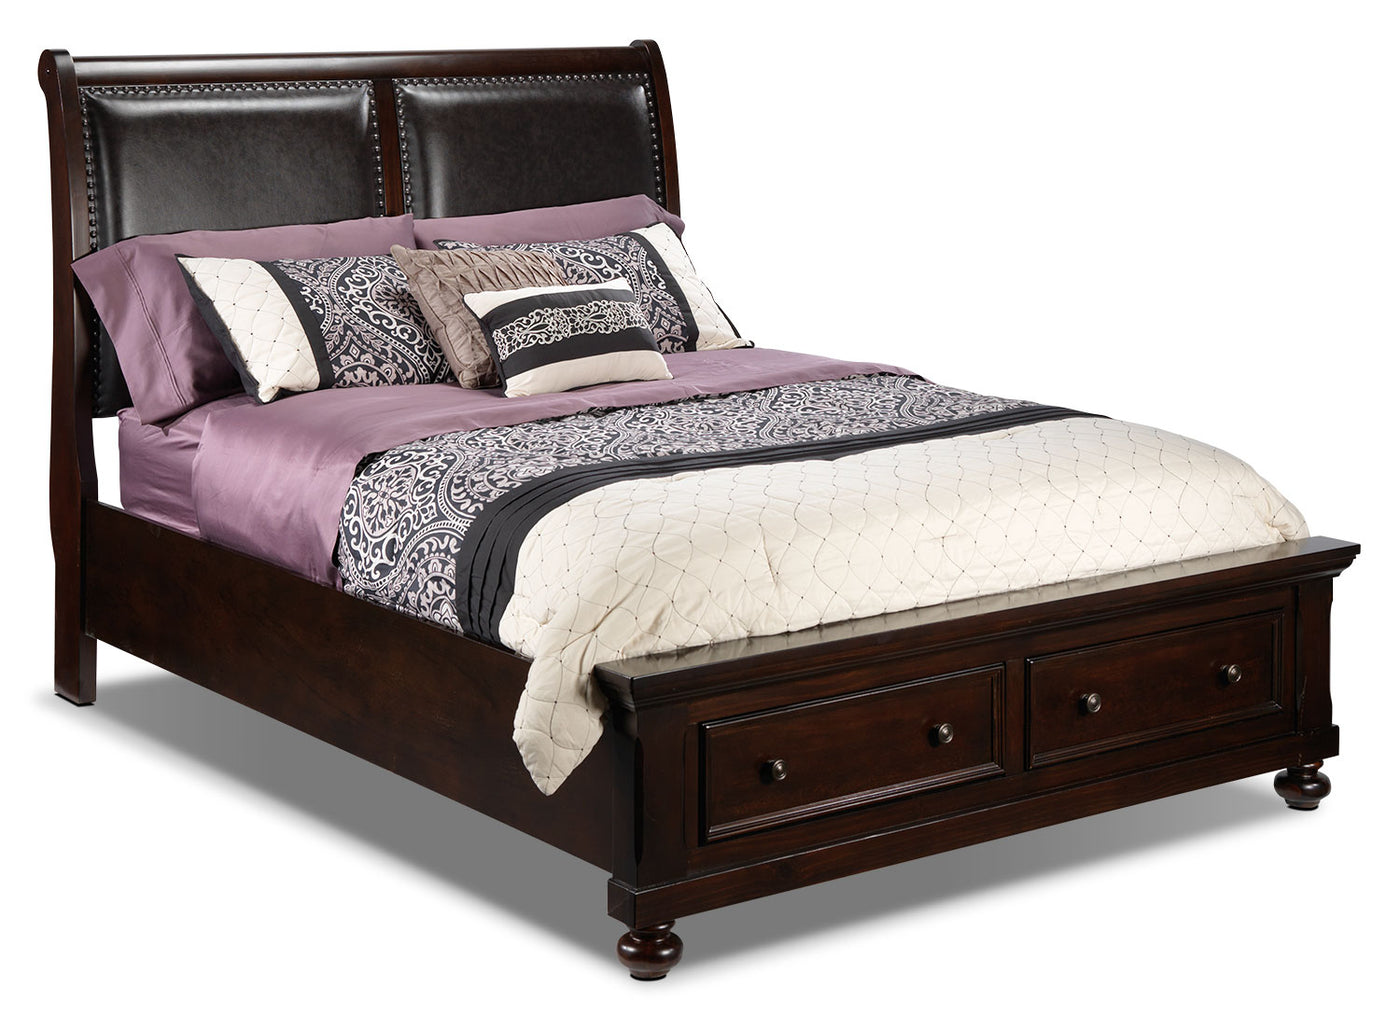 Chester 6-Piece King Storage Bedroom Package - Cherry